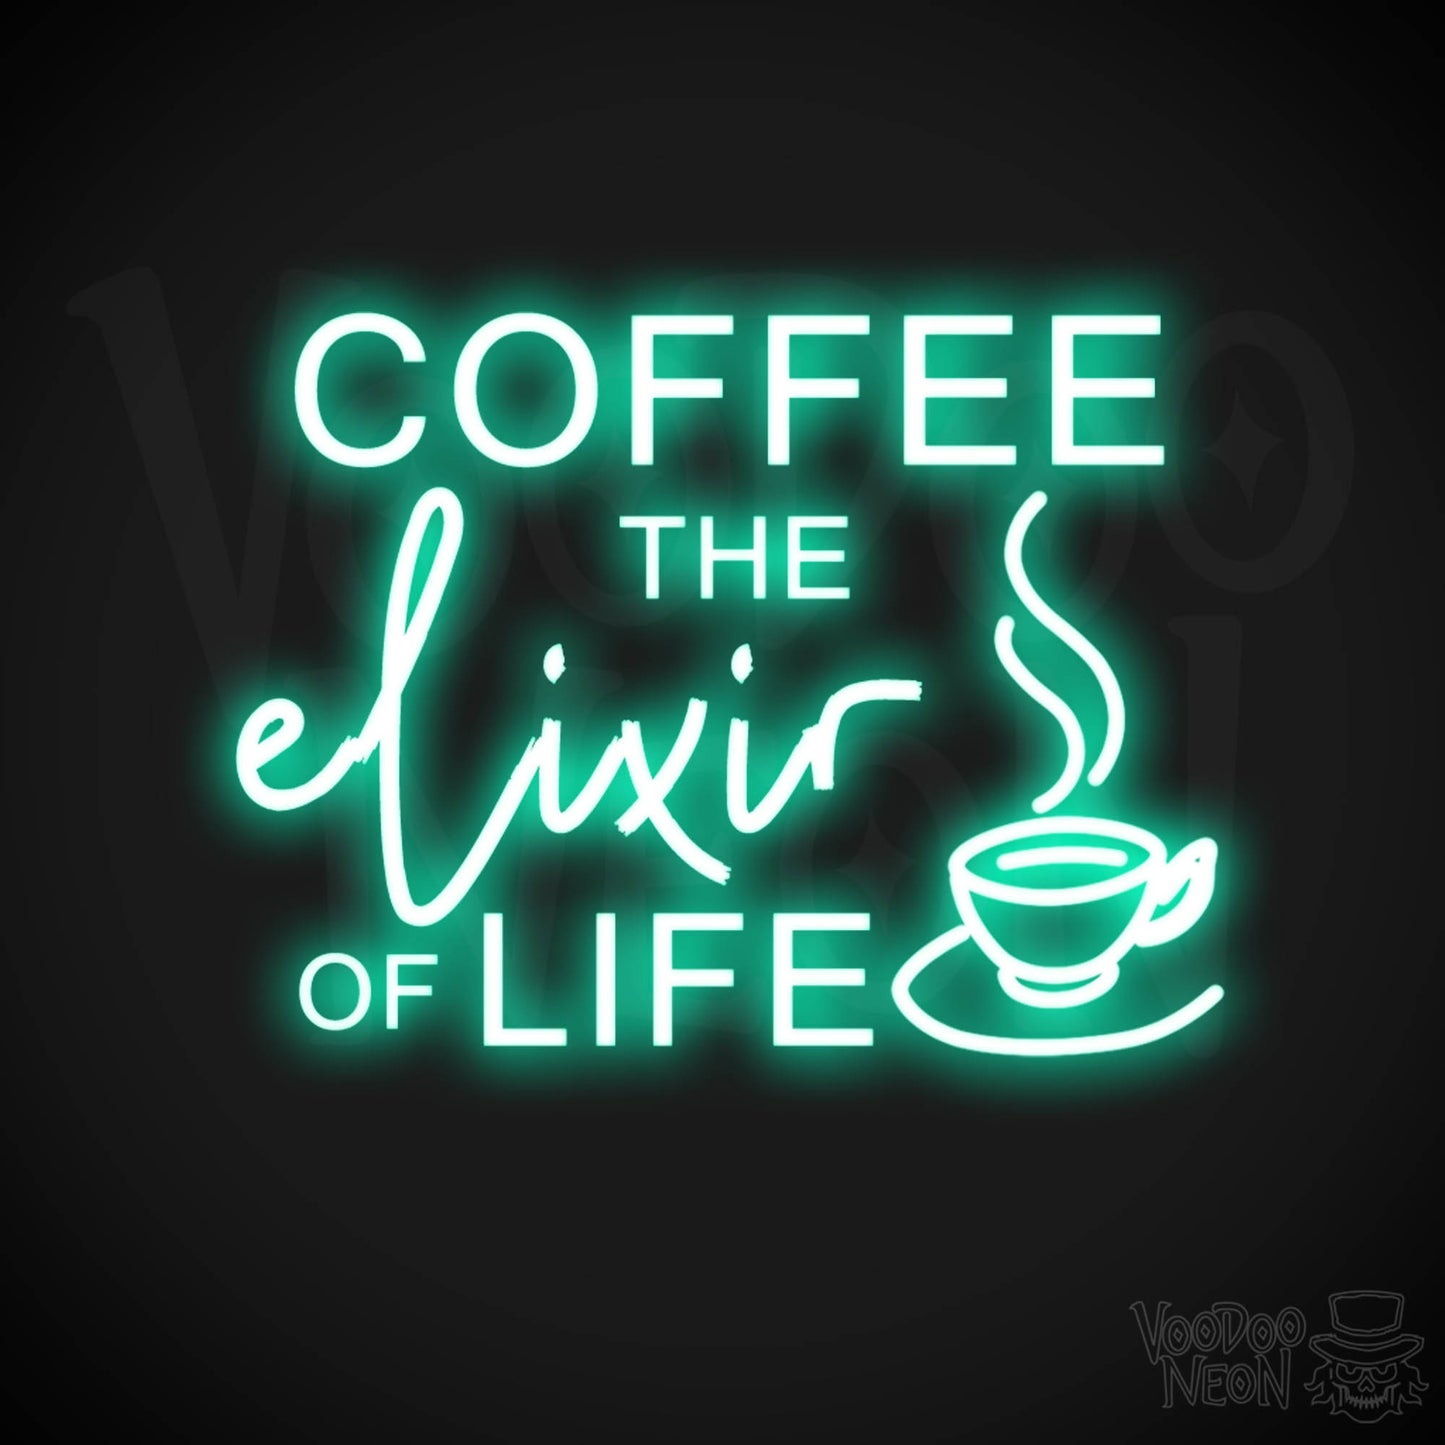 Coffee - The Elixir Of Life Neon Sign - The Elixir Of Life Sign - Color Light Green